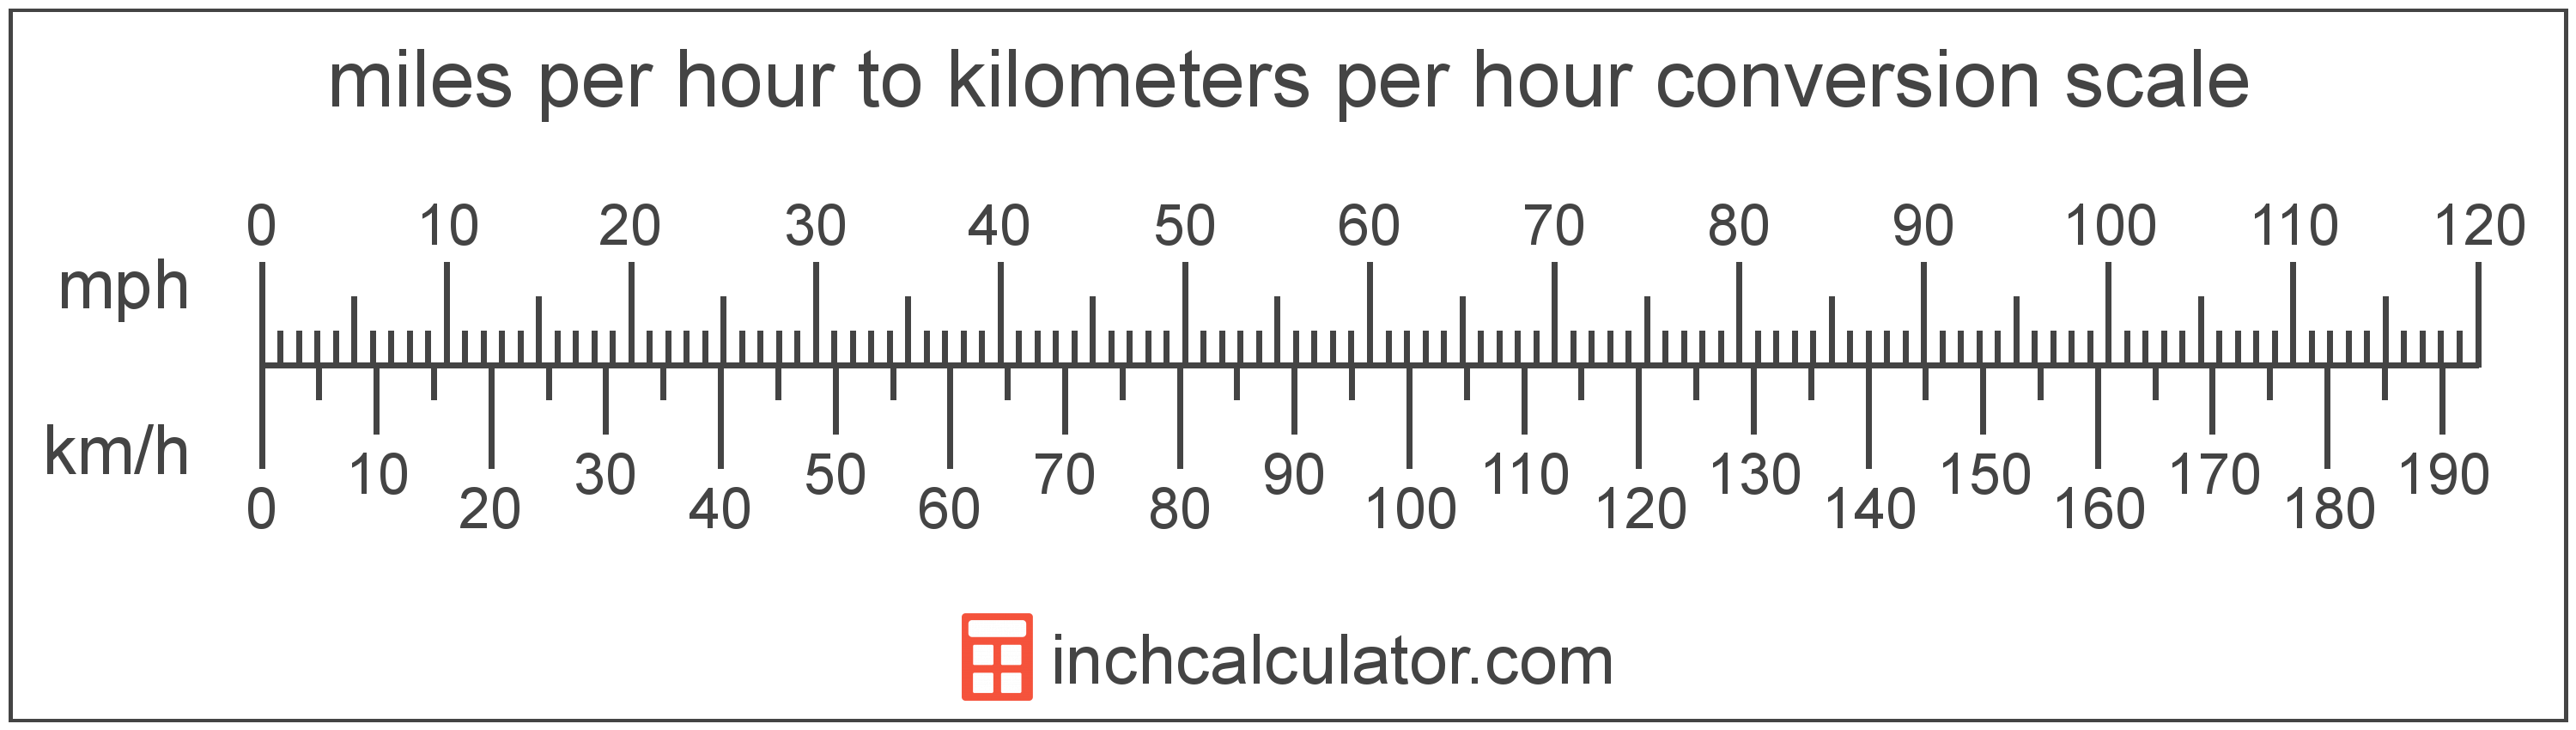 conversion scale showing kilometers per hour and equivalent miles per hour speed values